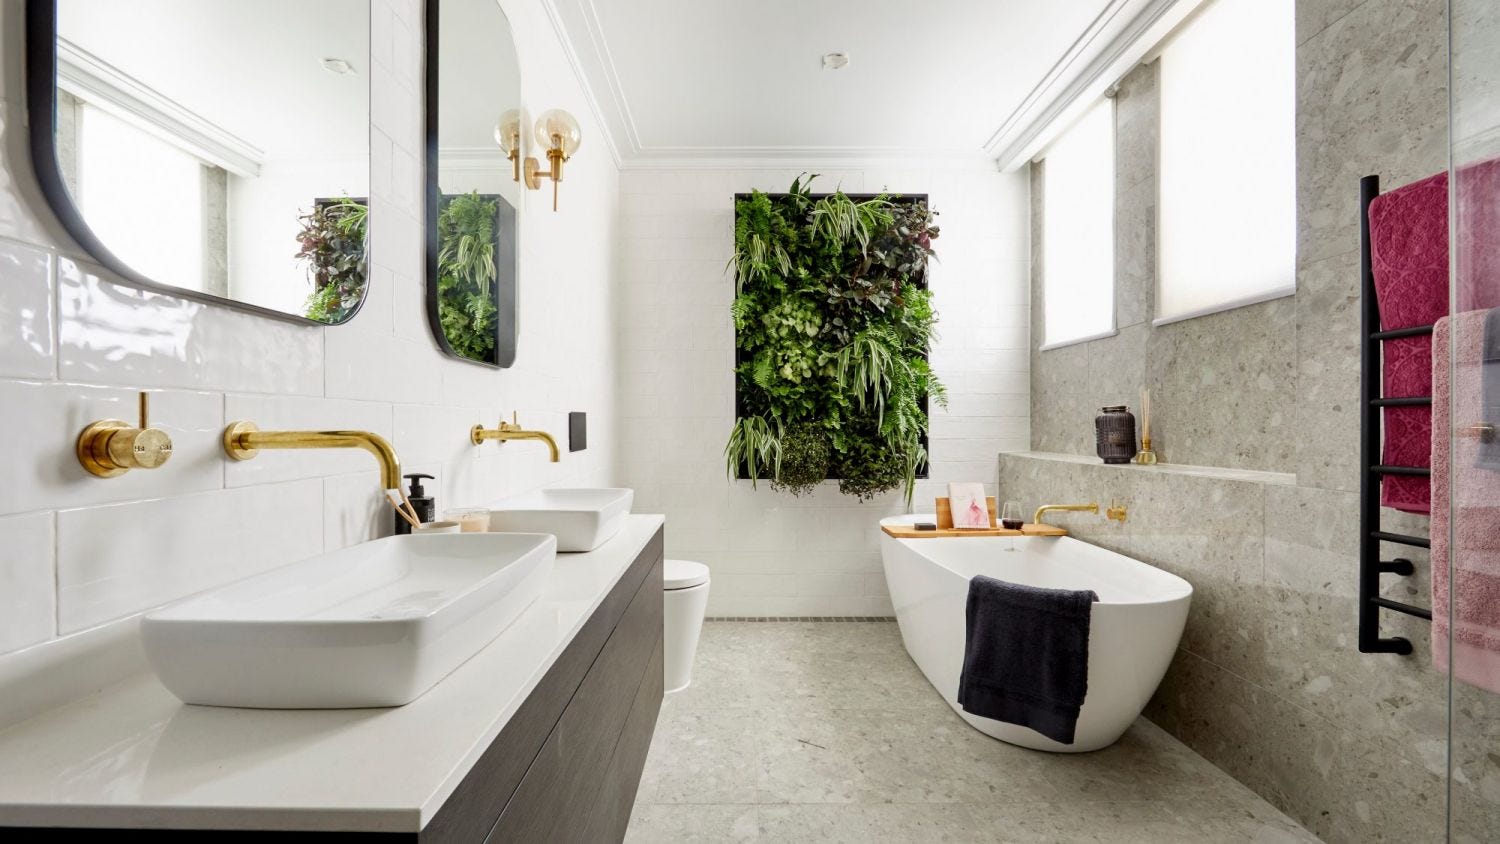 5 Must-Have Upgrades for Your Dream Bathroom